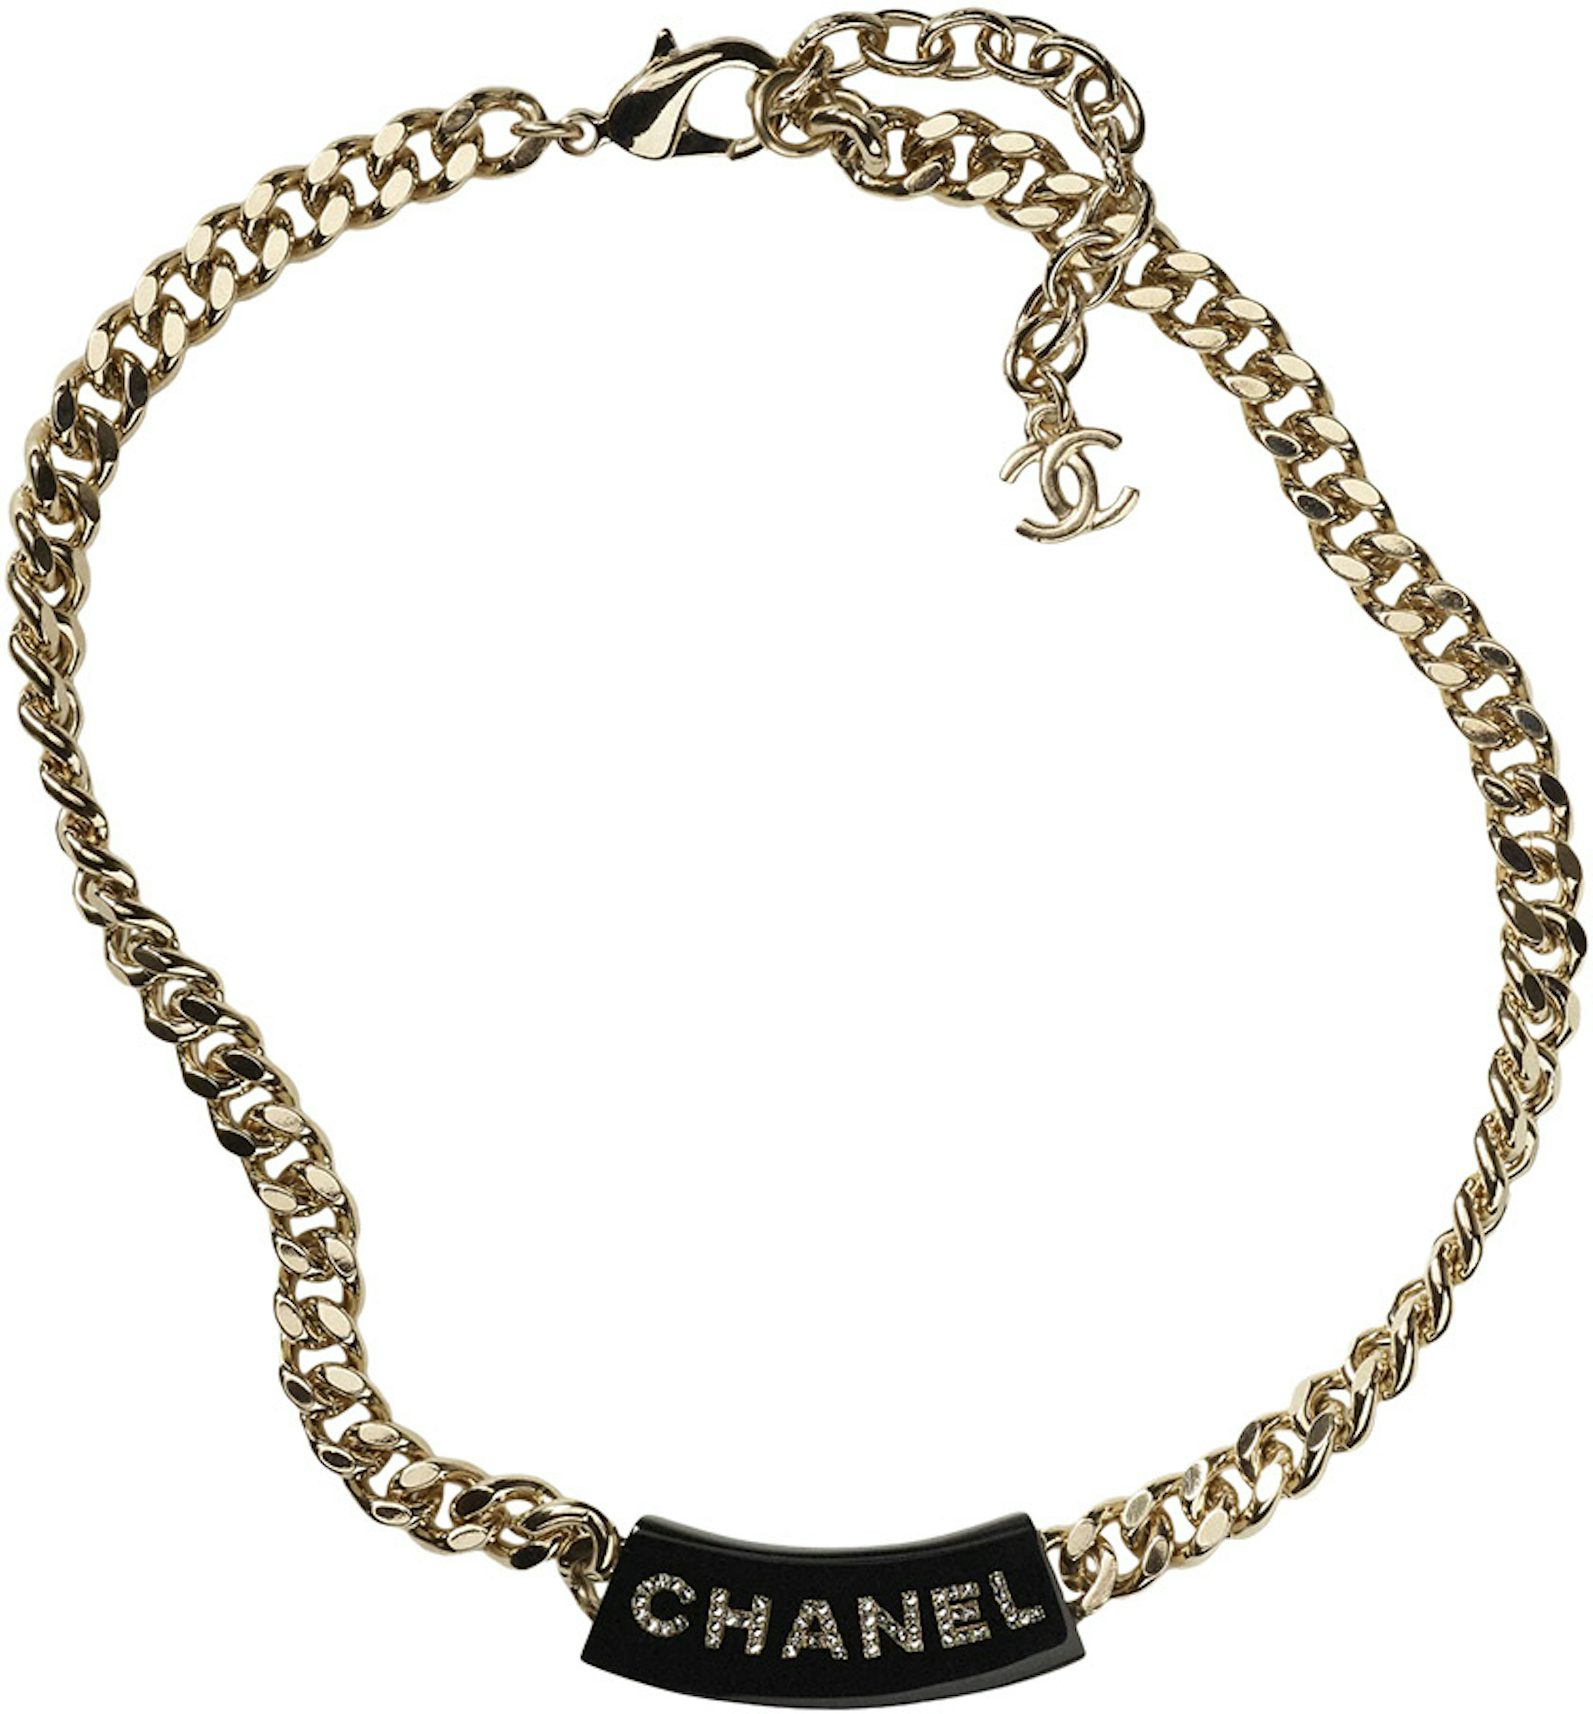 Chanel Interlocking Choker Necklace Gold/Silver/Crystal in Metal/Strass - GB